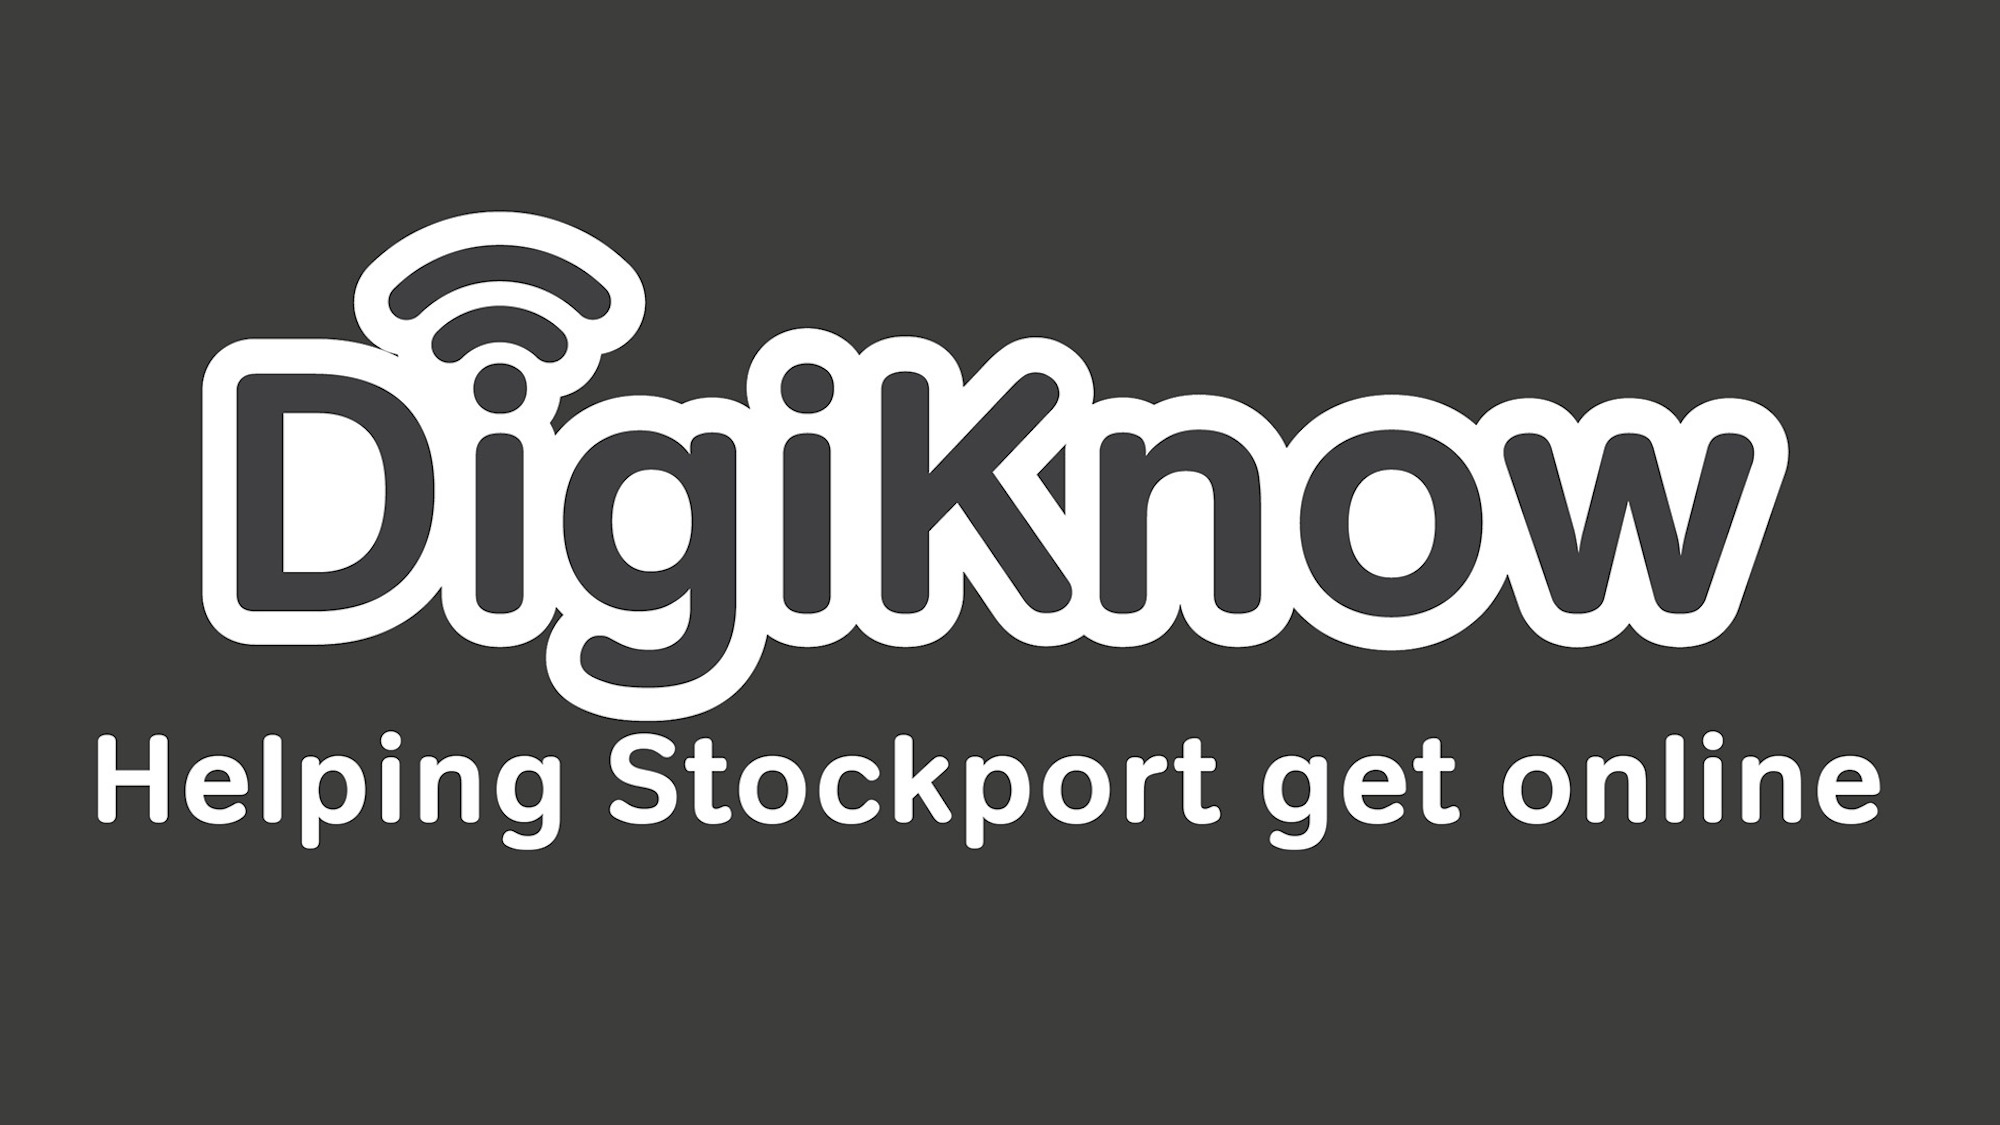 Two years of digital skills support invaluable for Stockport in lockdown